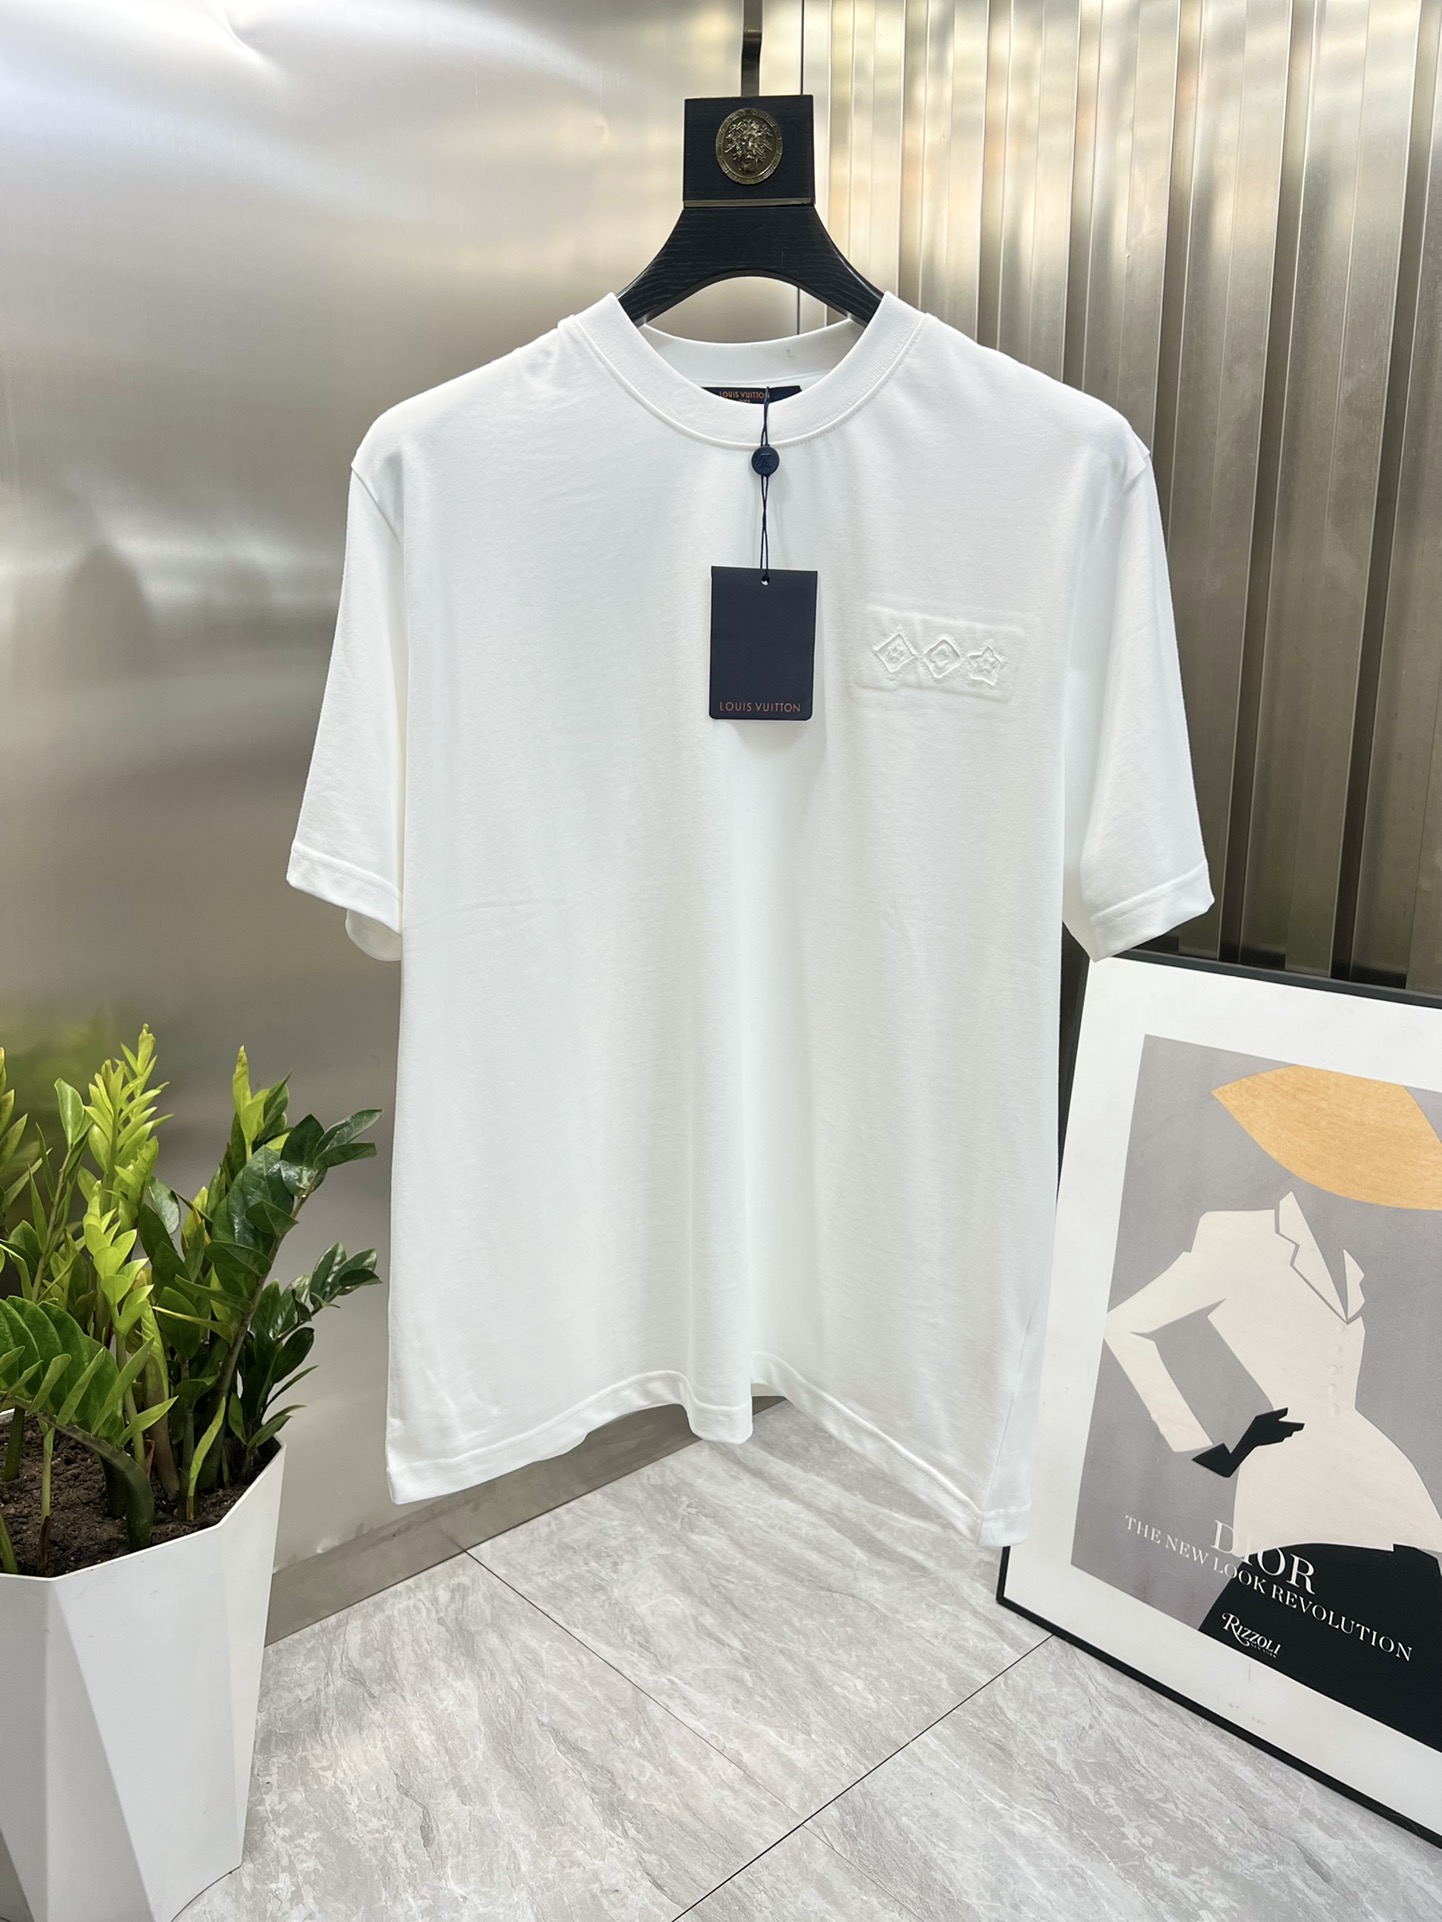 Louis Vuitton Clothing T-Shirt mirror copy luxury
 Spring/Summer Collection Short Sleeve